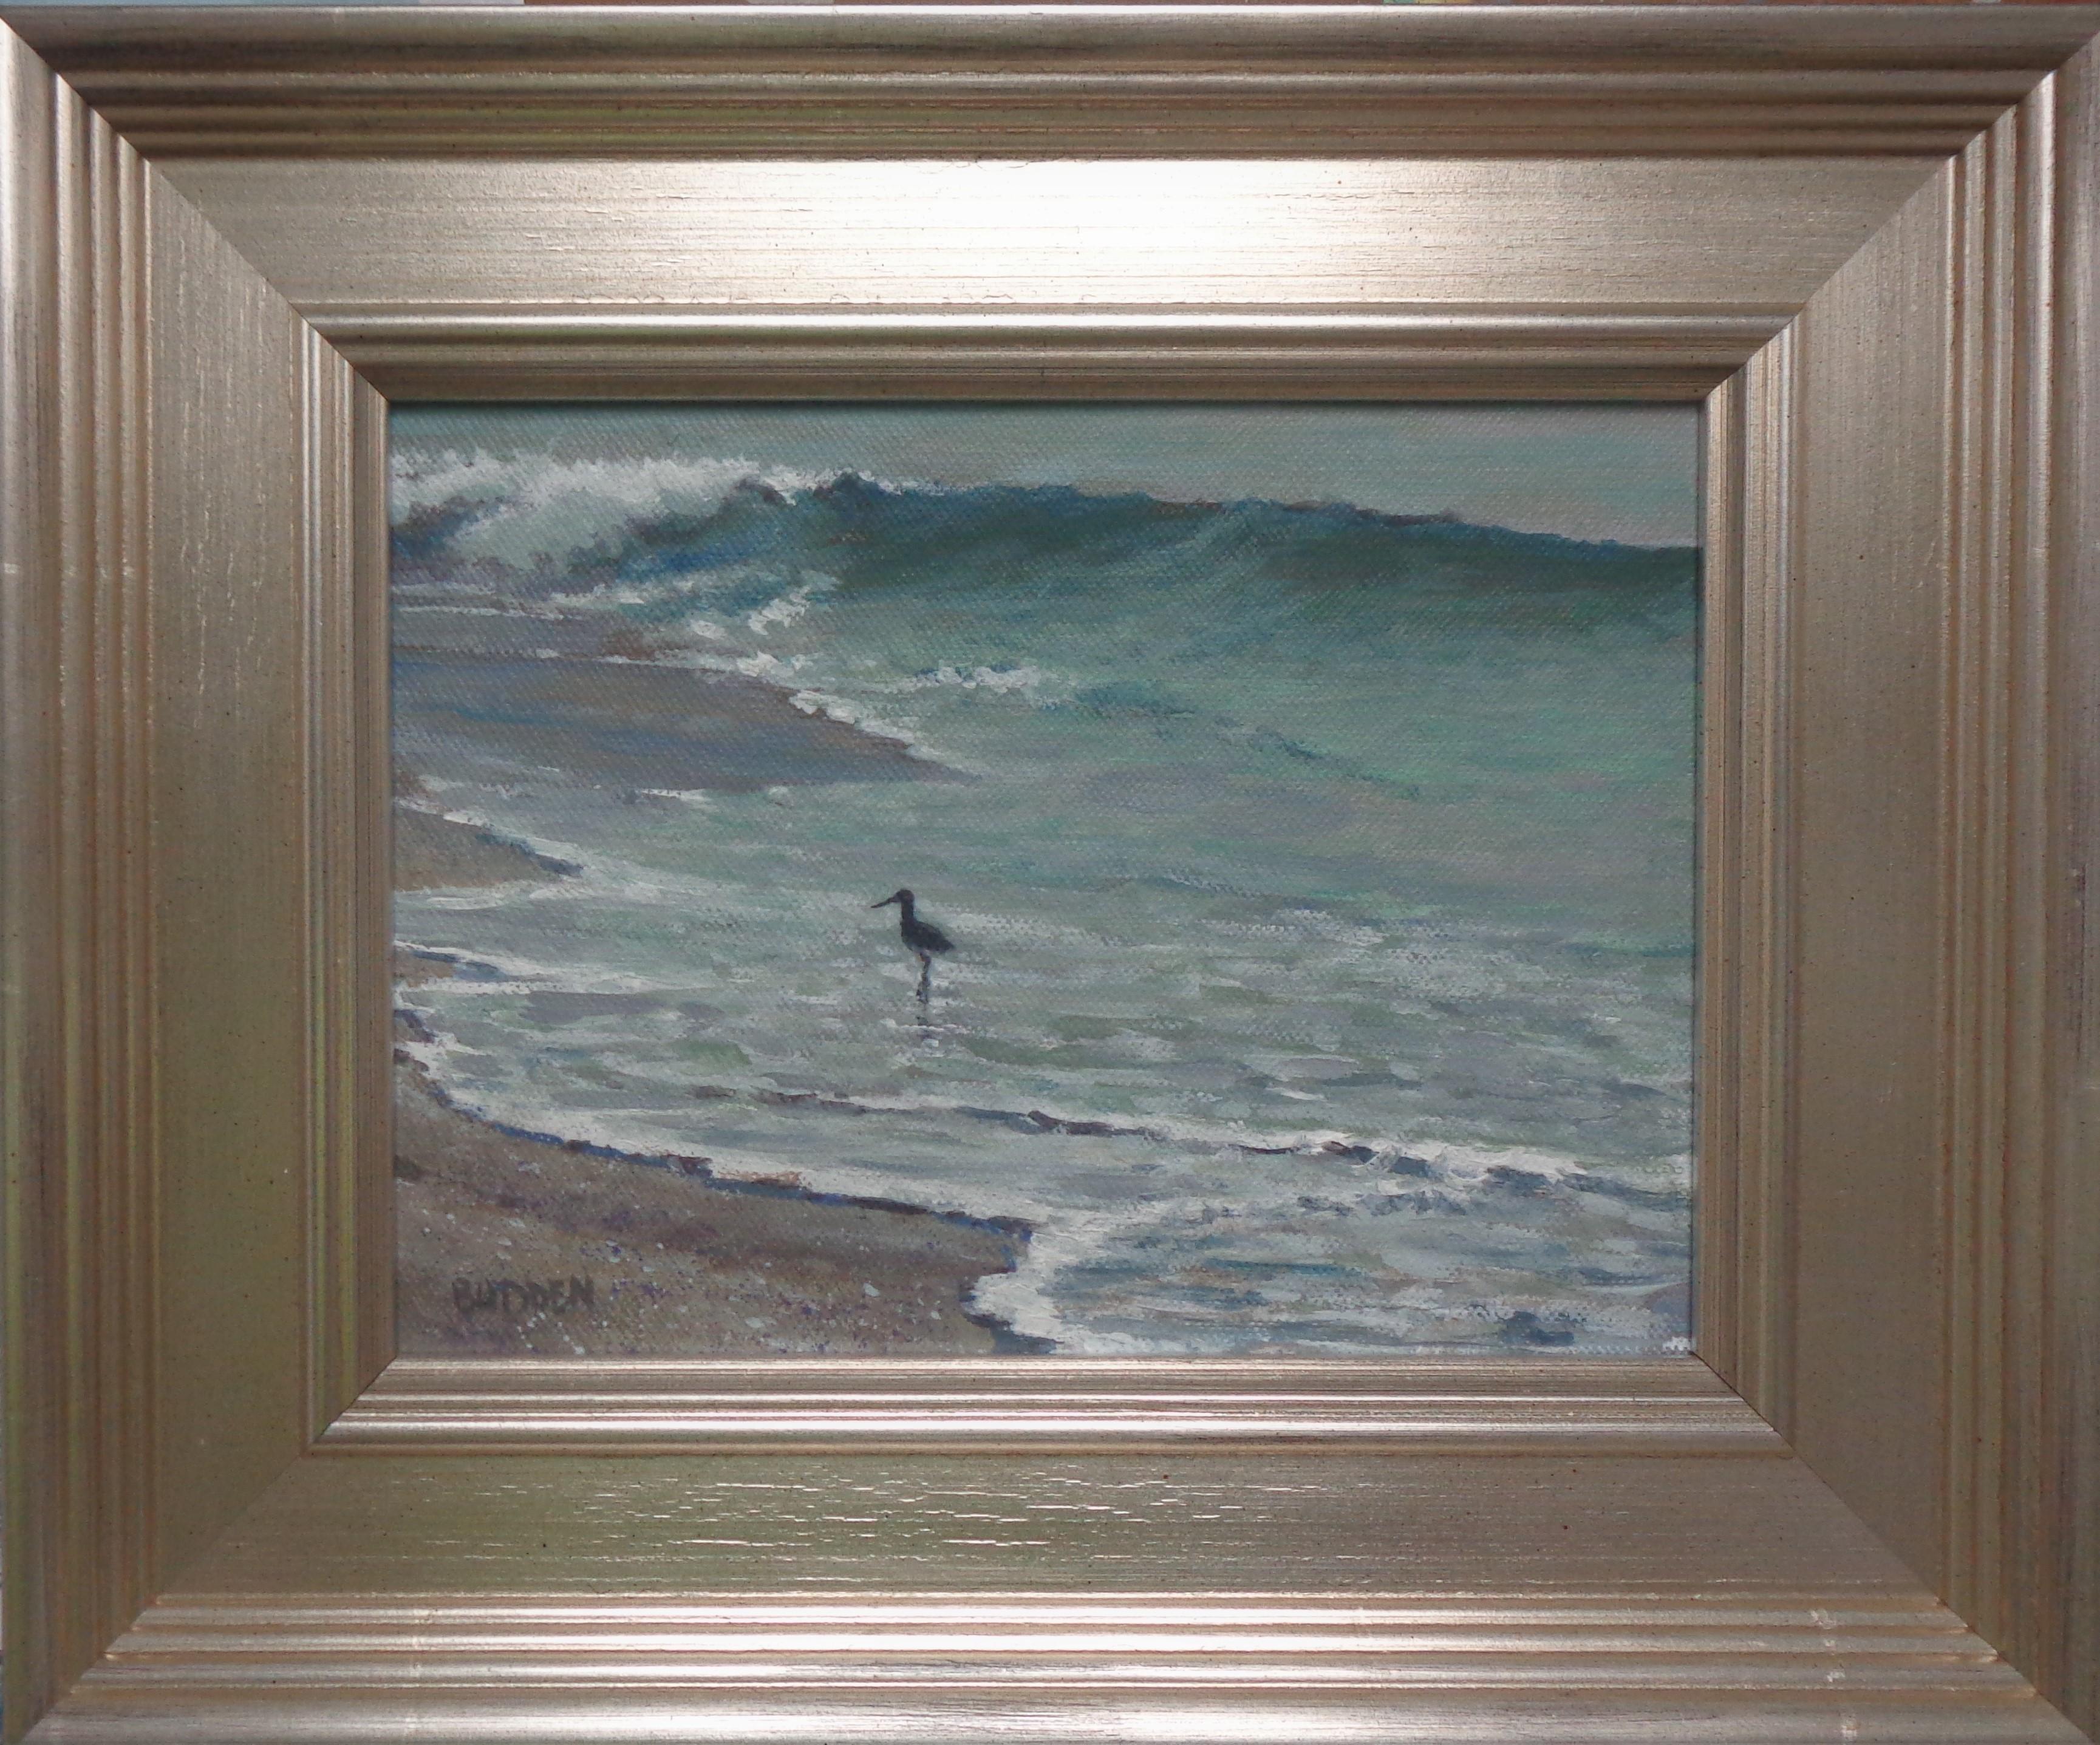  Coastal Wader
oil/panel 6 x 8 image
Coastal Wader is an oil painting on canvas panel by award winning contemporary artist Michael Budden that showcases a uniquely beautiful shoreline with a wading bird among gentle waves. This painting is part of a